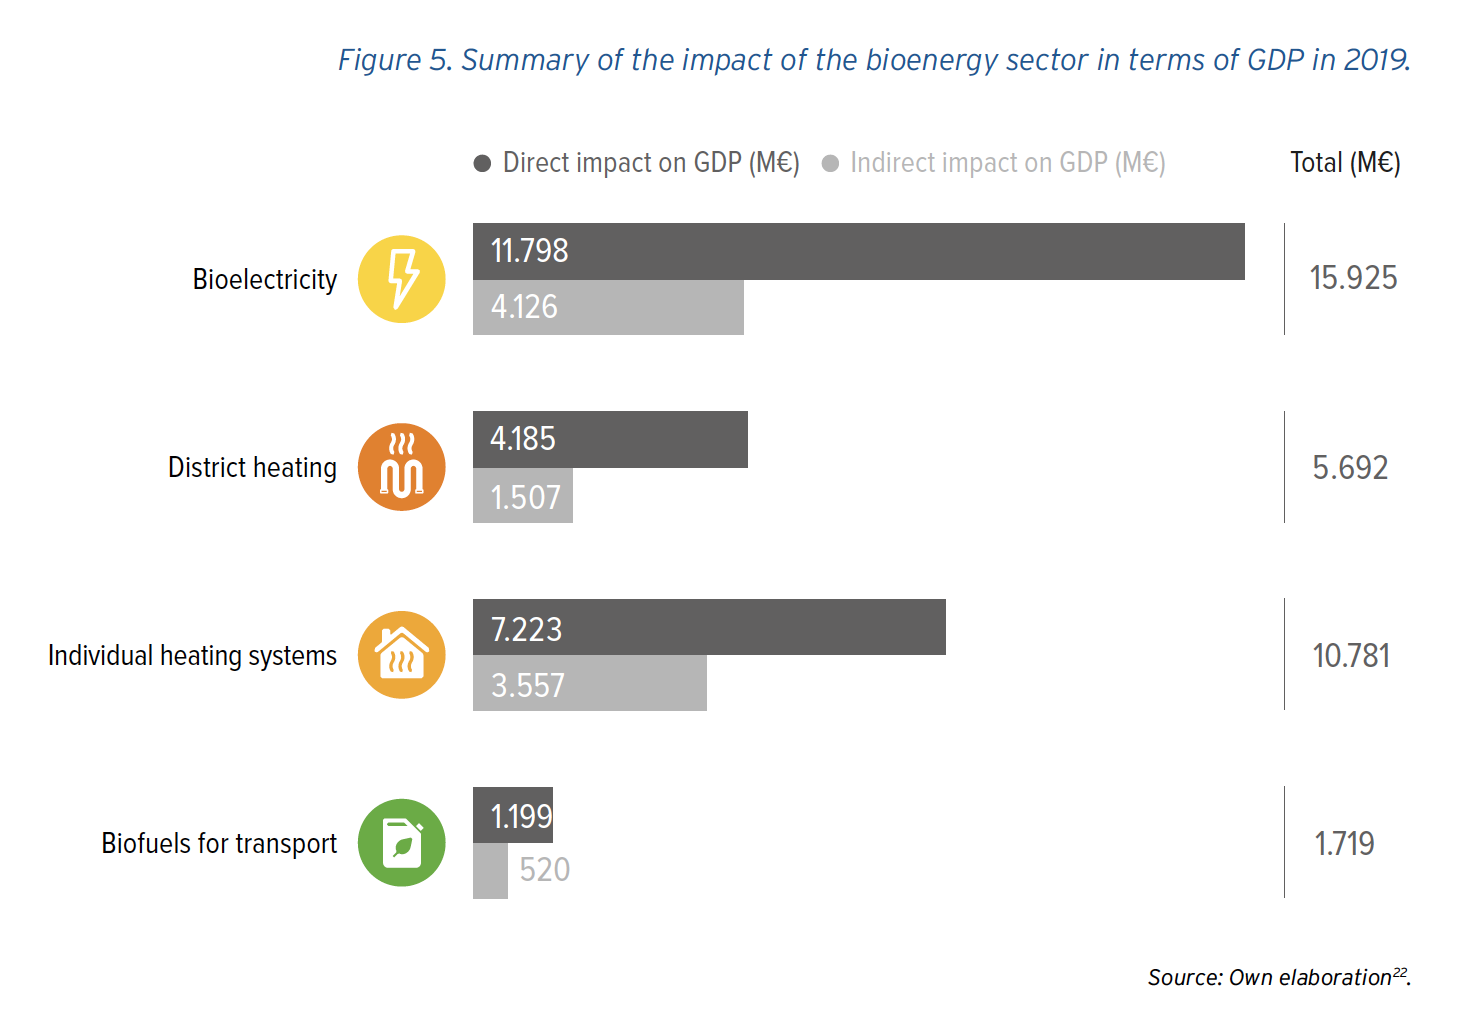 Summary of the impact of the bioenergy sector in terms of GDP in 2019